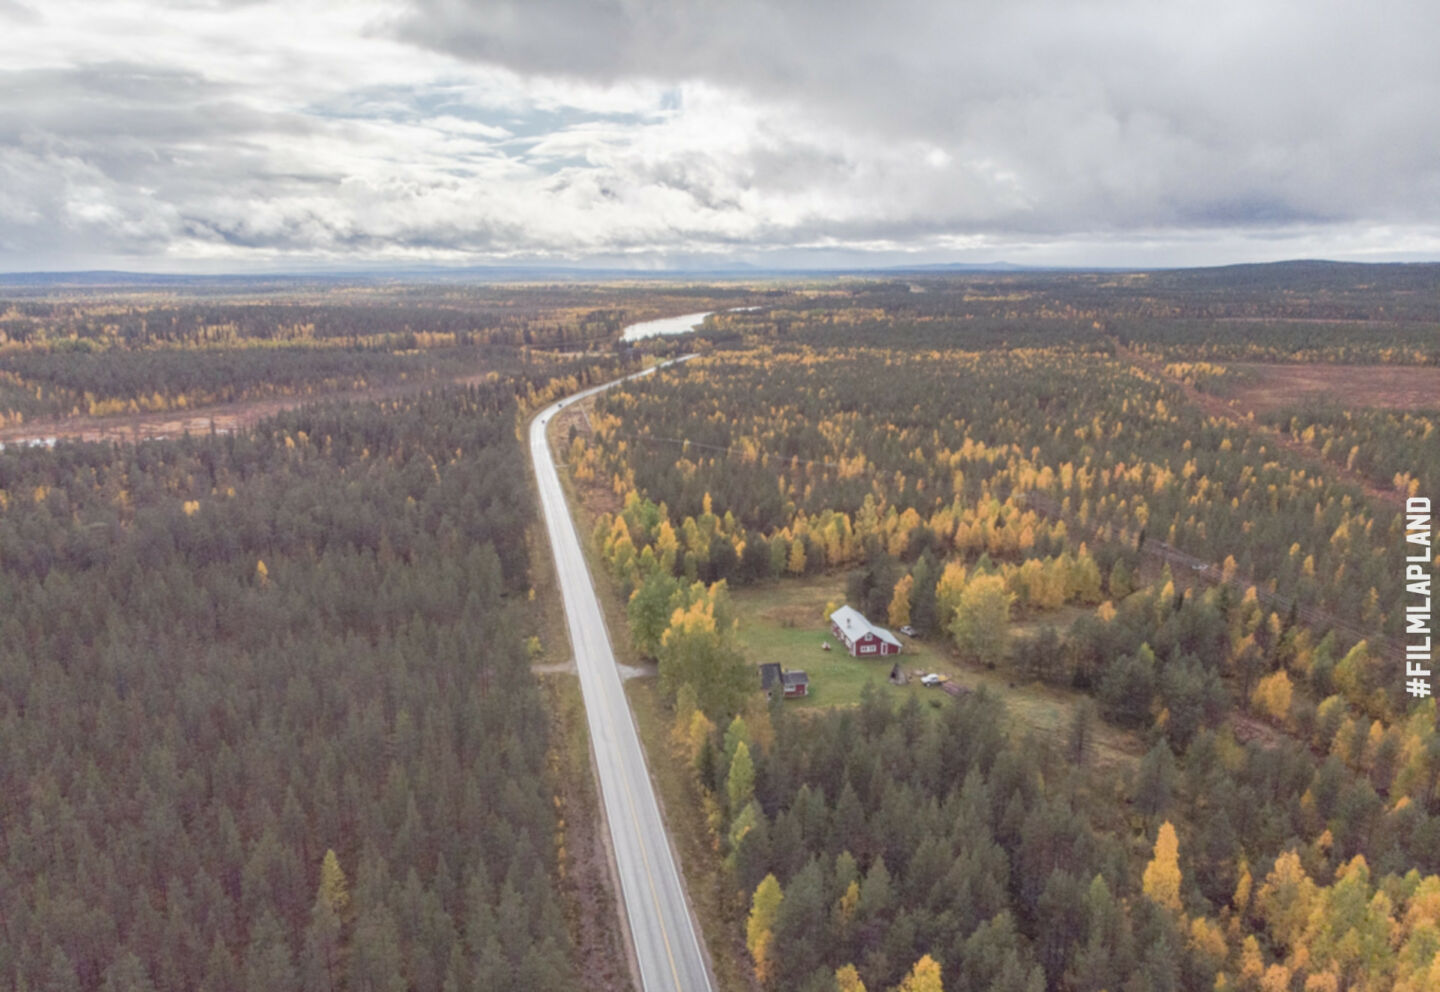 Autumn colors in Savukoski, a feature of filming in Finnish Lapland locations